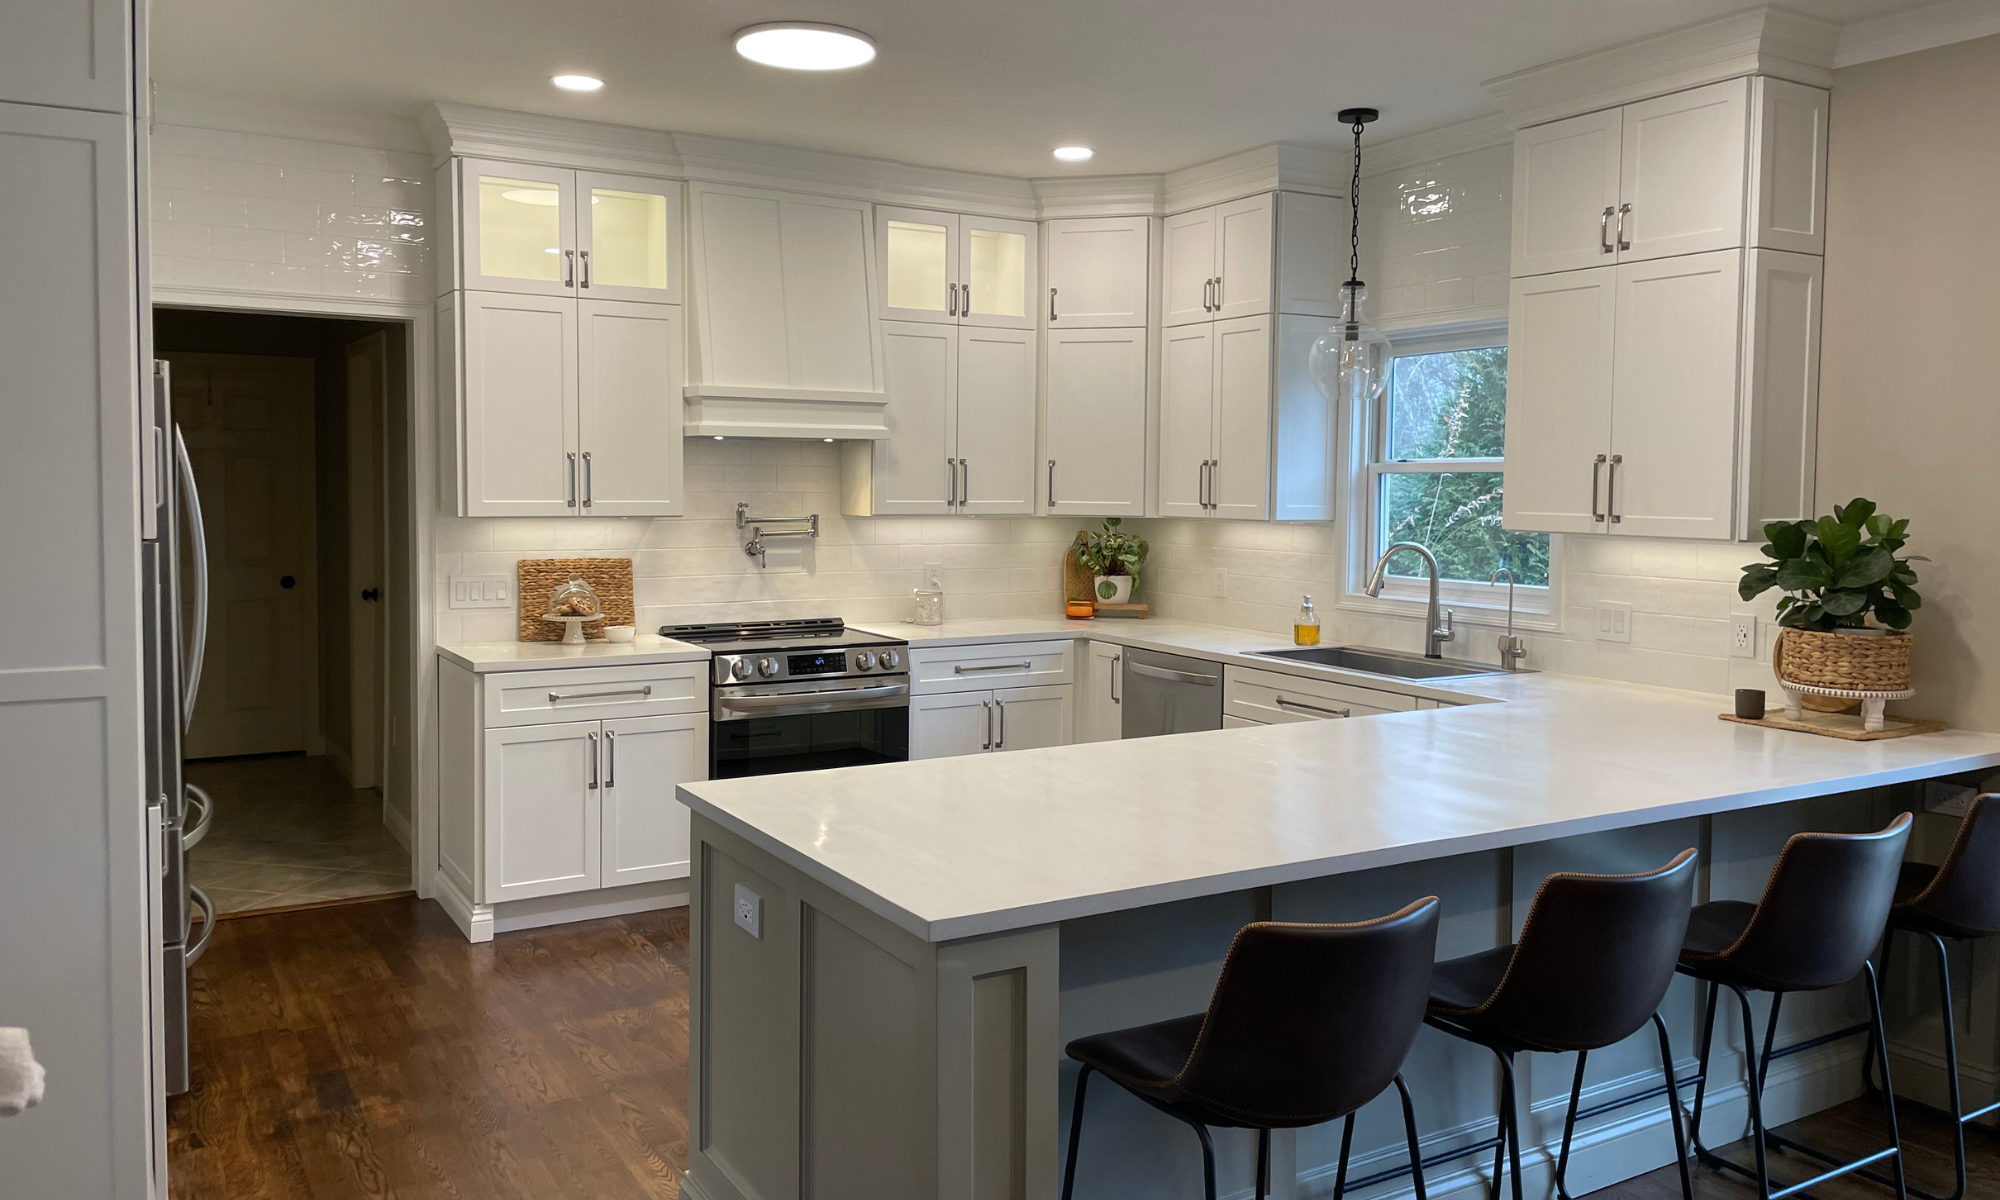 Modern kitchen with refaced cabinet doors and fronts - shaker profile in white color.